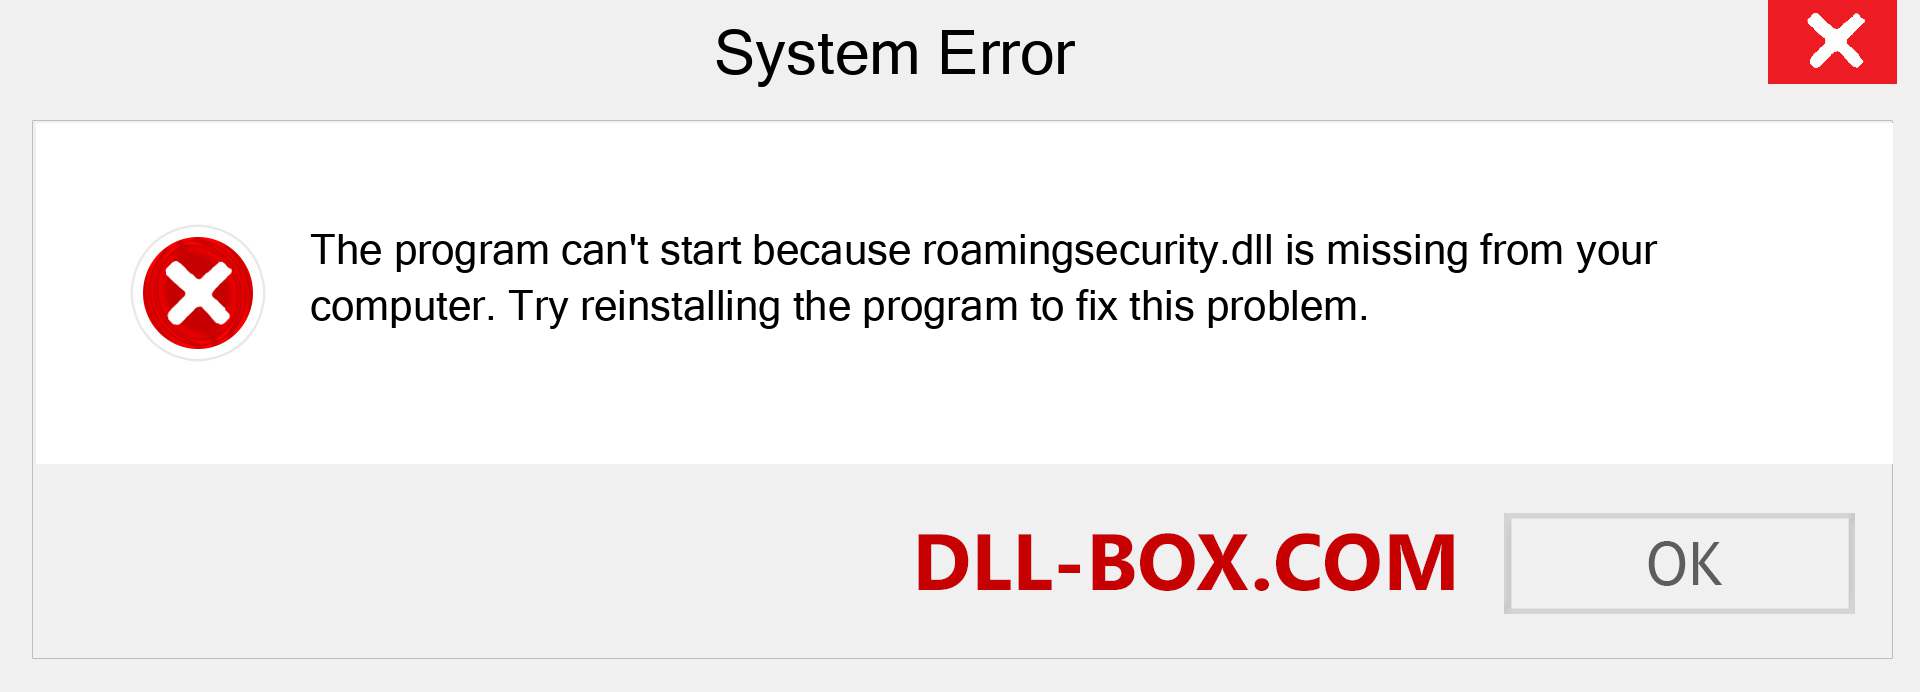  roamingsecurity.dll file is missing?. Download for Windows 7, 8, 10 - Fix  roamingsecurity dll Missing Error on Windows, photos, images